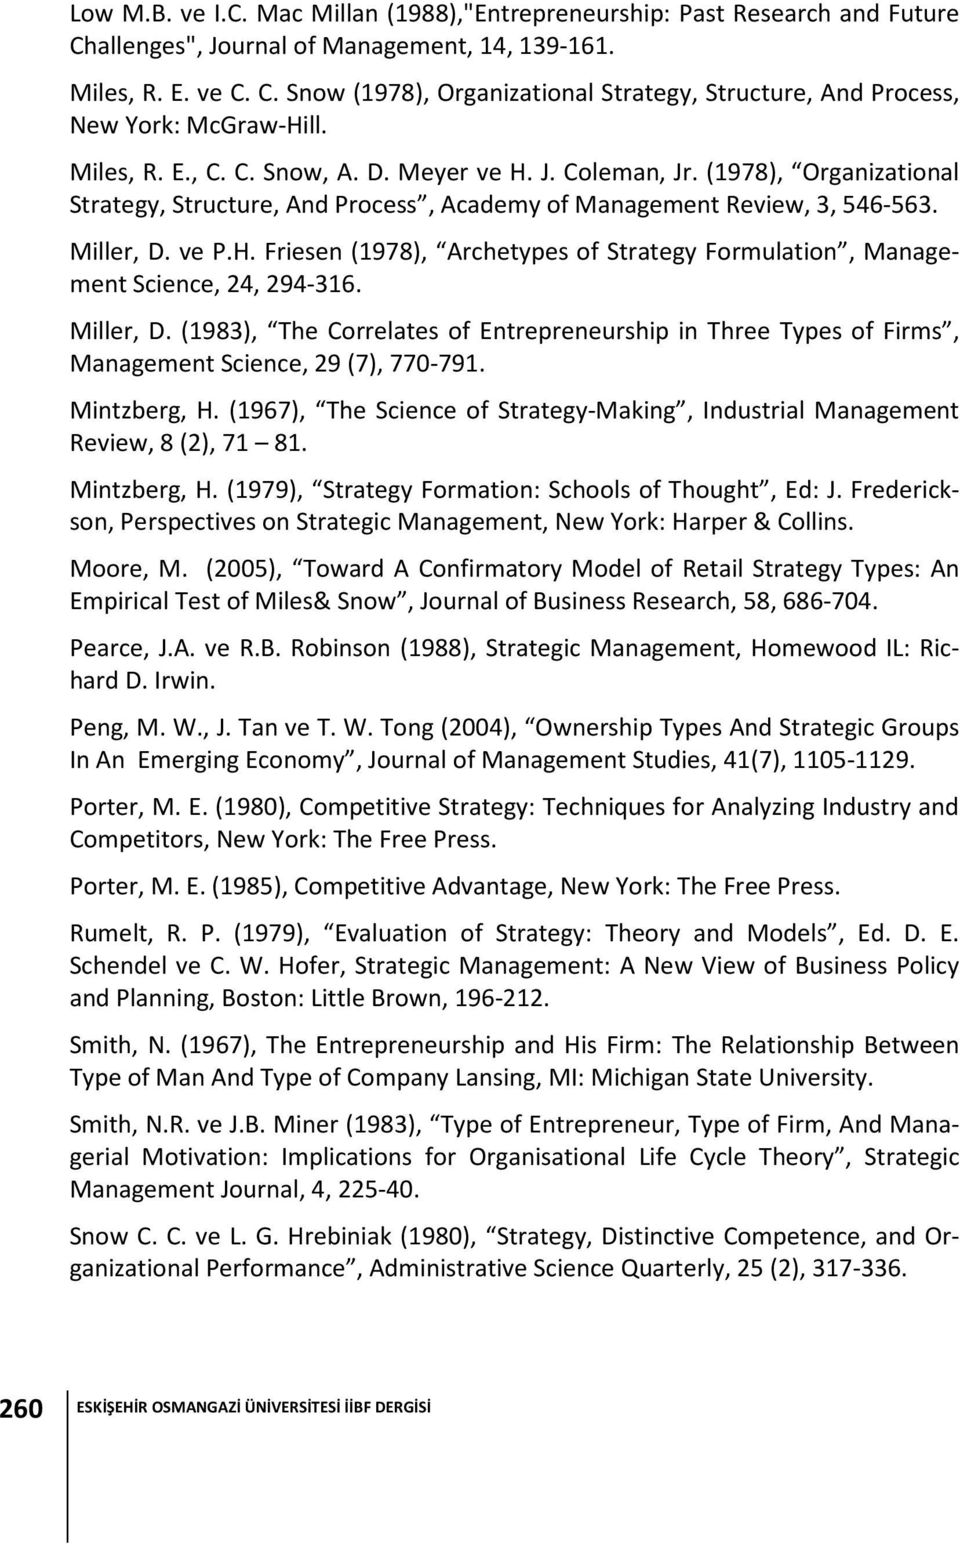 Miller, D. (1983), The Correlates of Entrepreneurship in Three Types of Firms, Management Science, 29 (7), 770-791. Mintzberg, H.